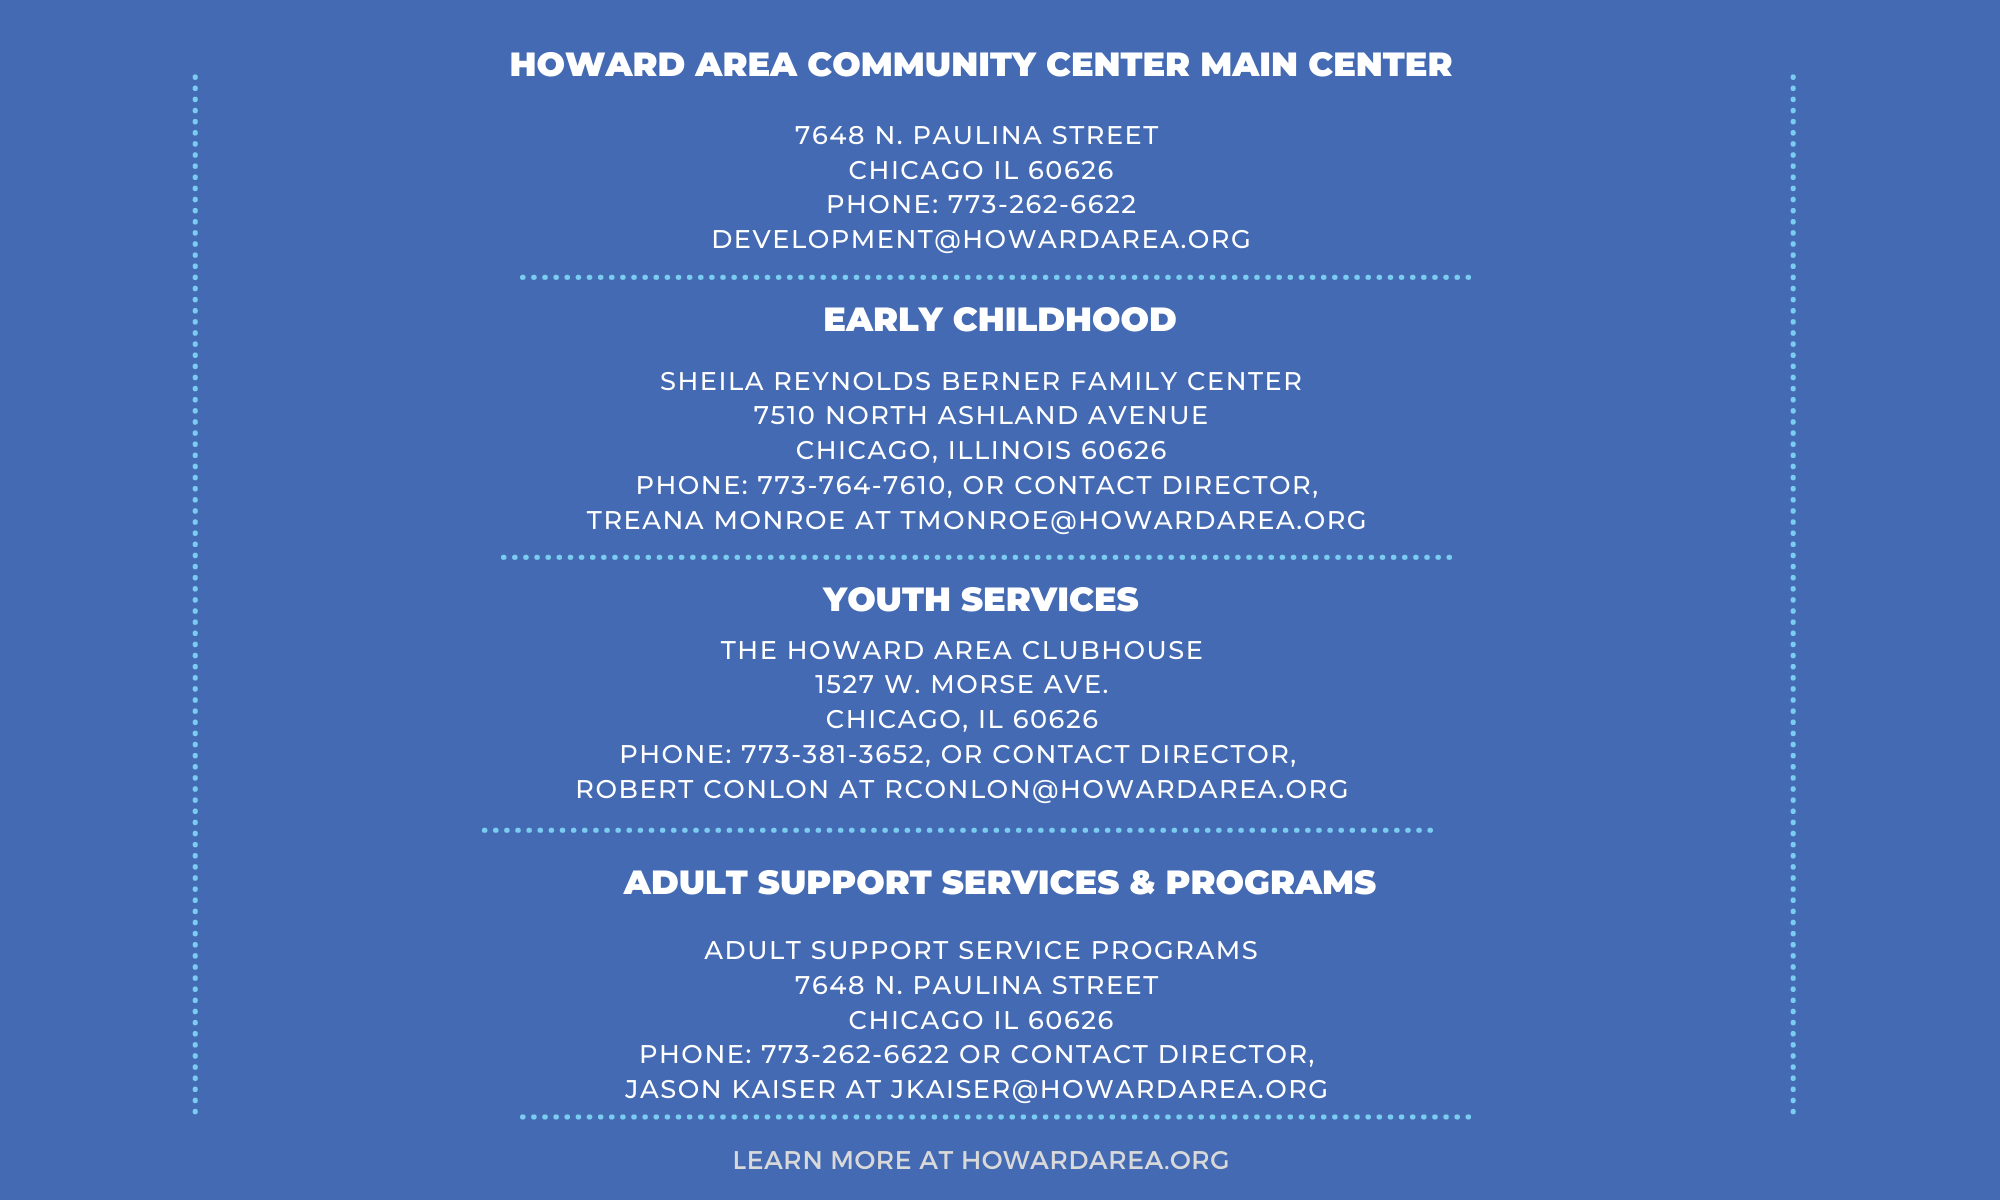 Howard and Evanston Community Center 2021 Infographic Contacts